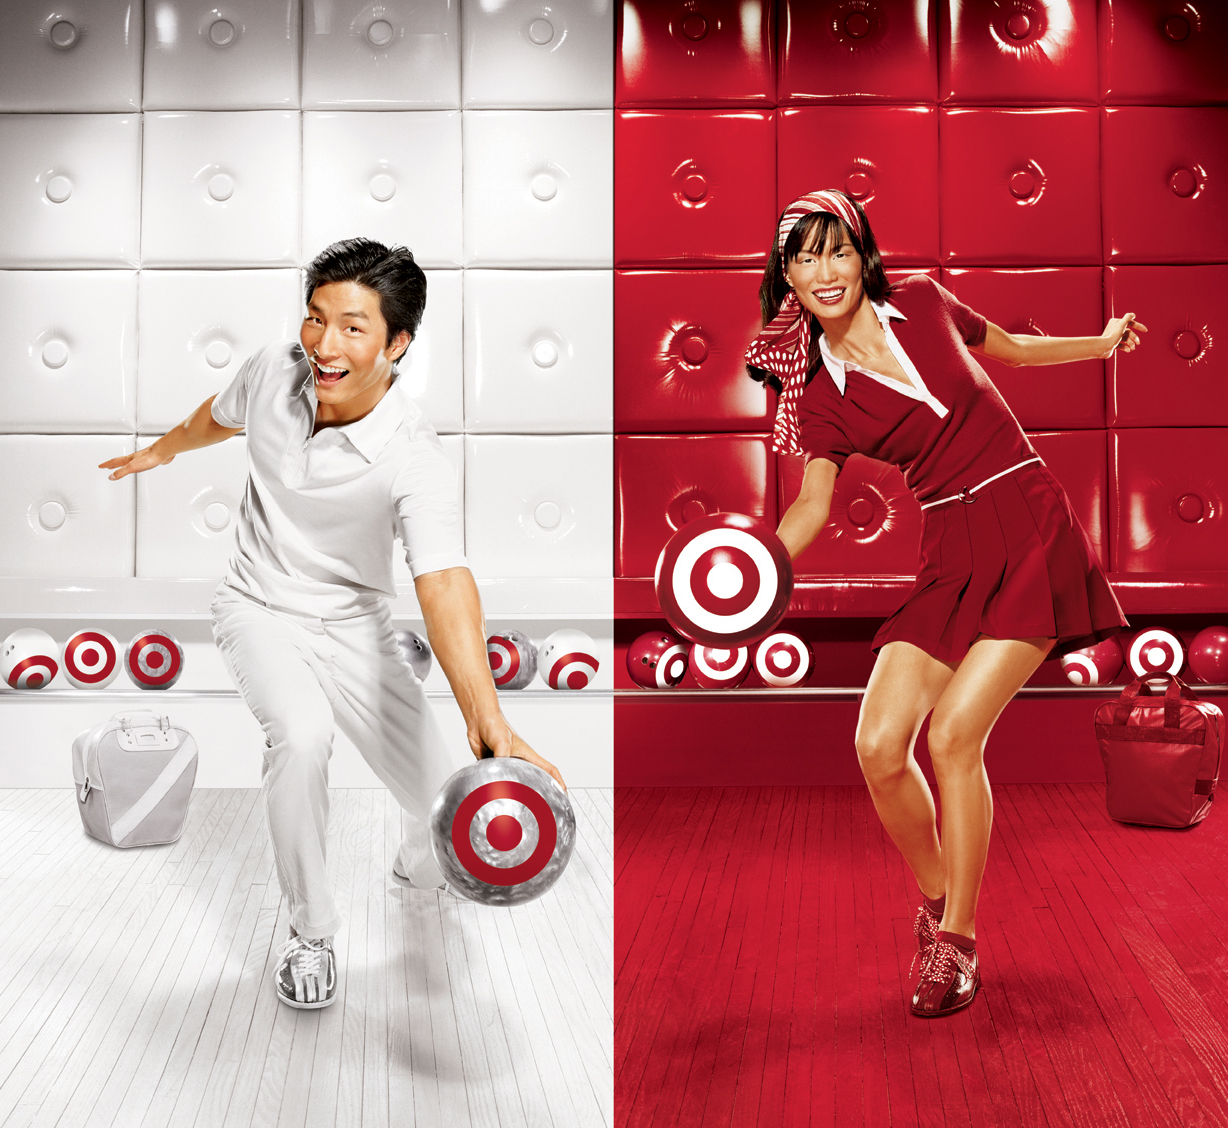 Target, Branding '05 bowling couple campaign image